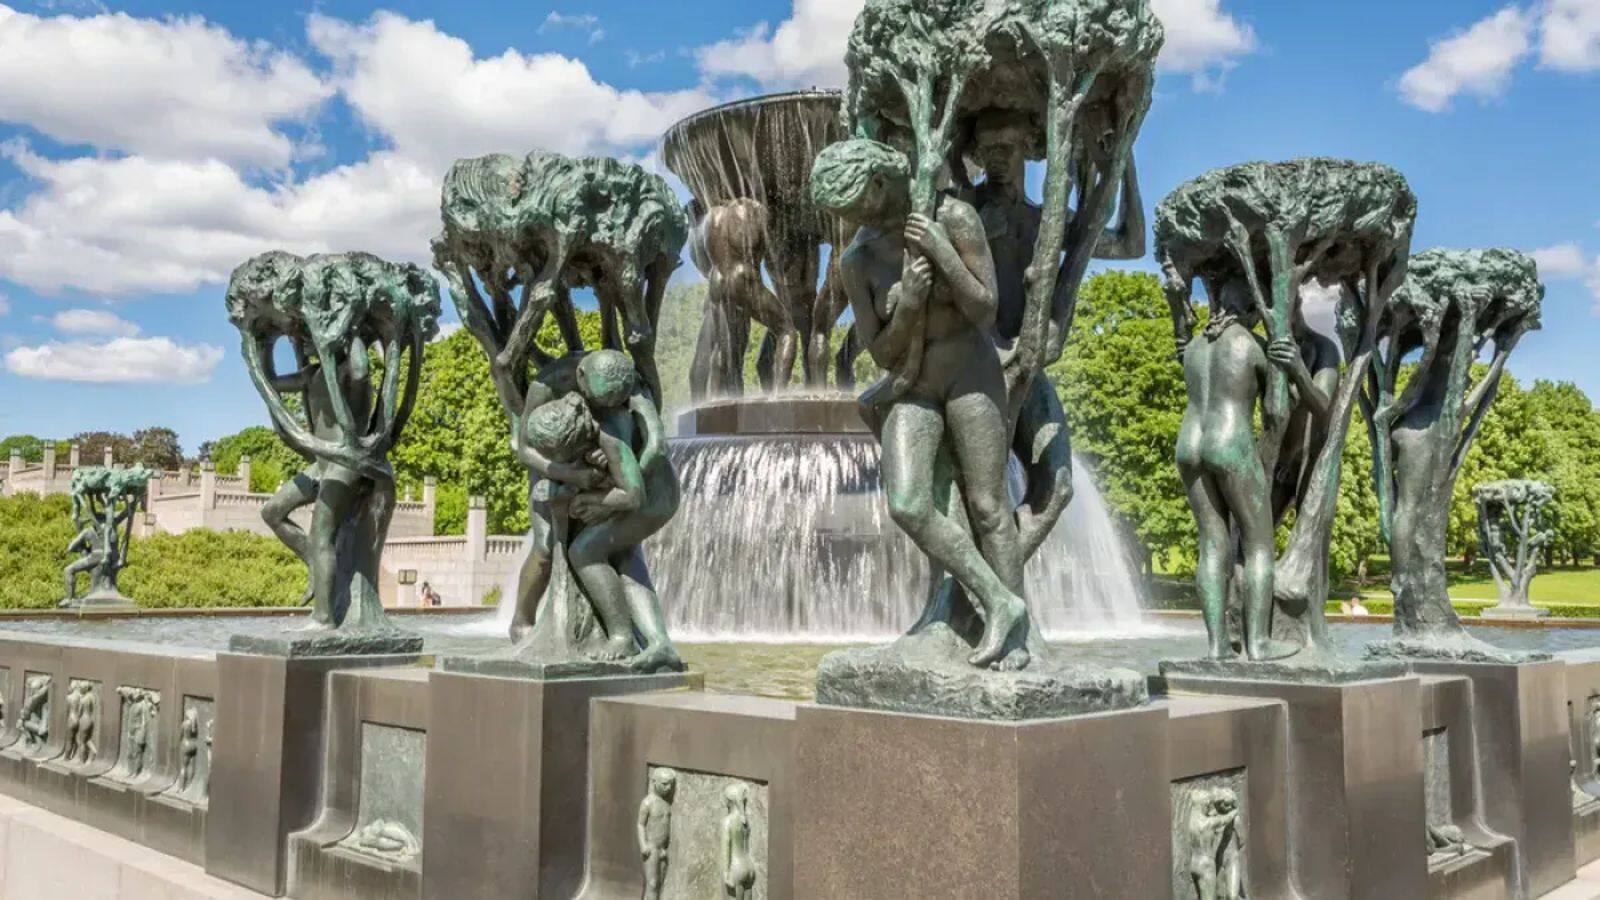 Have you been to Oslo's Vigeland Sculpture Park for picnic